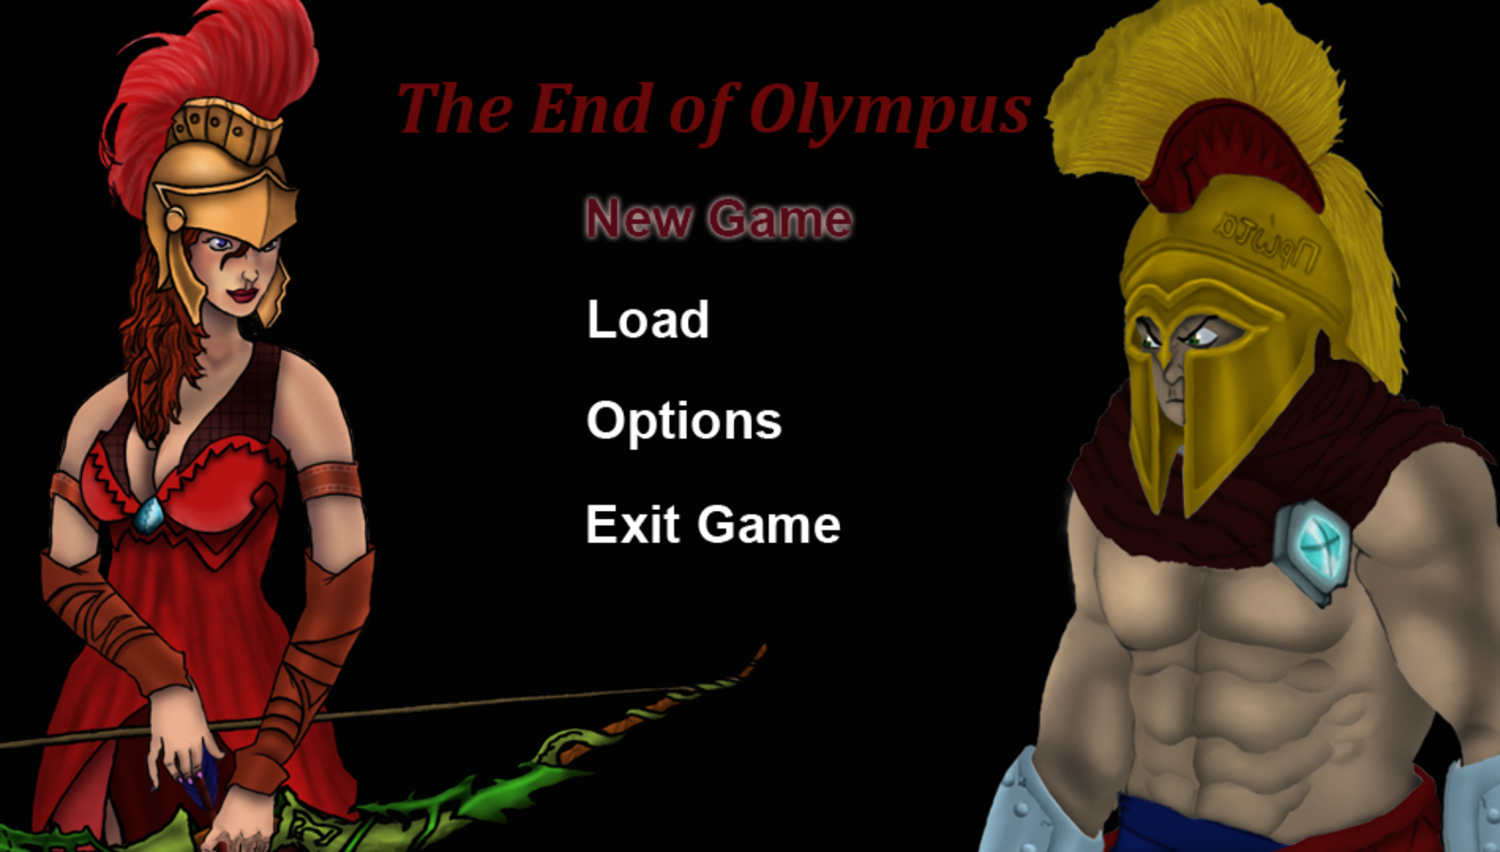 The End of Olympus Game Welcome Screen Screenshot.